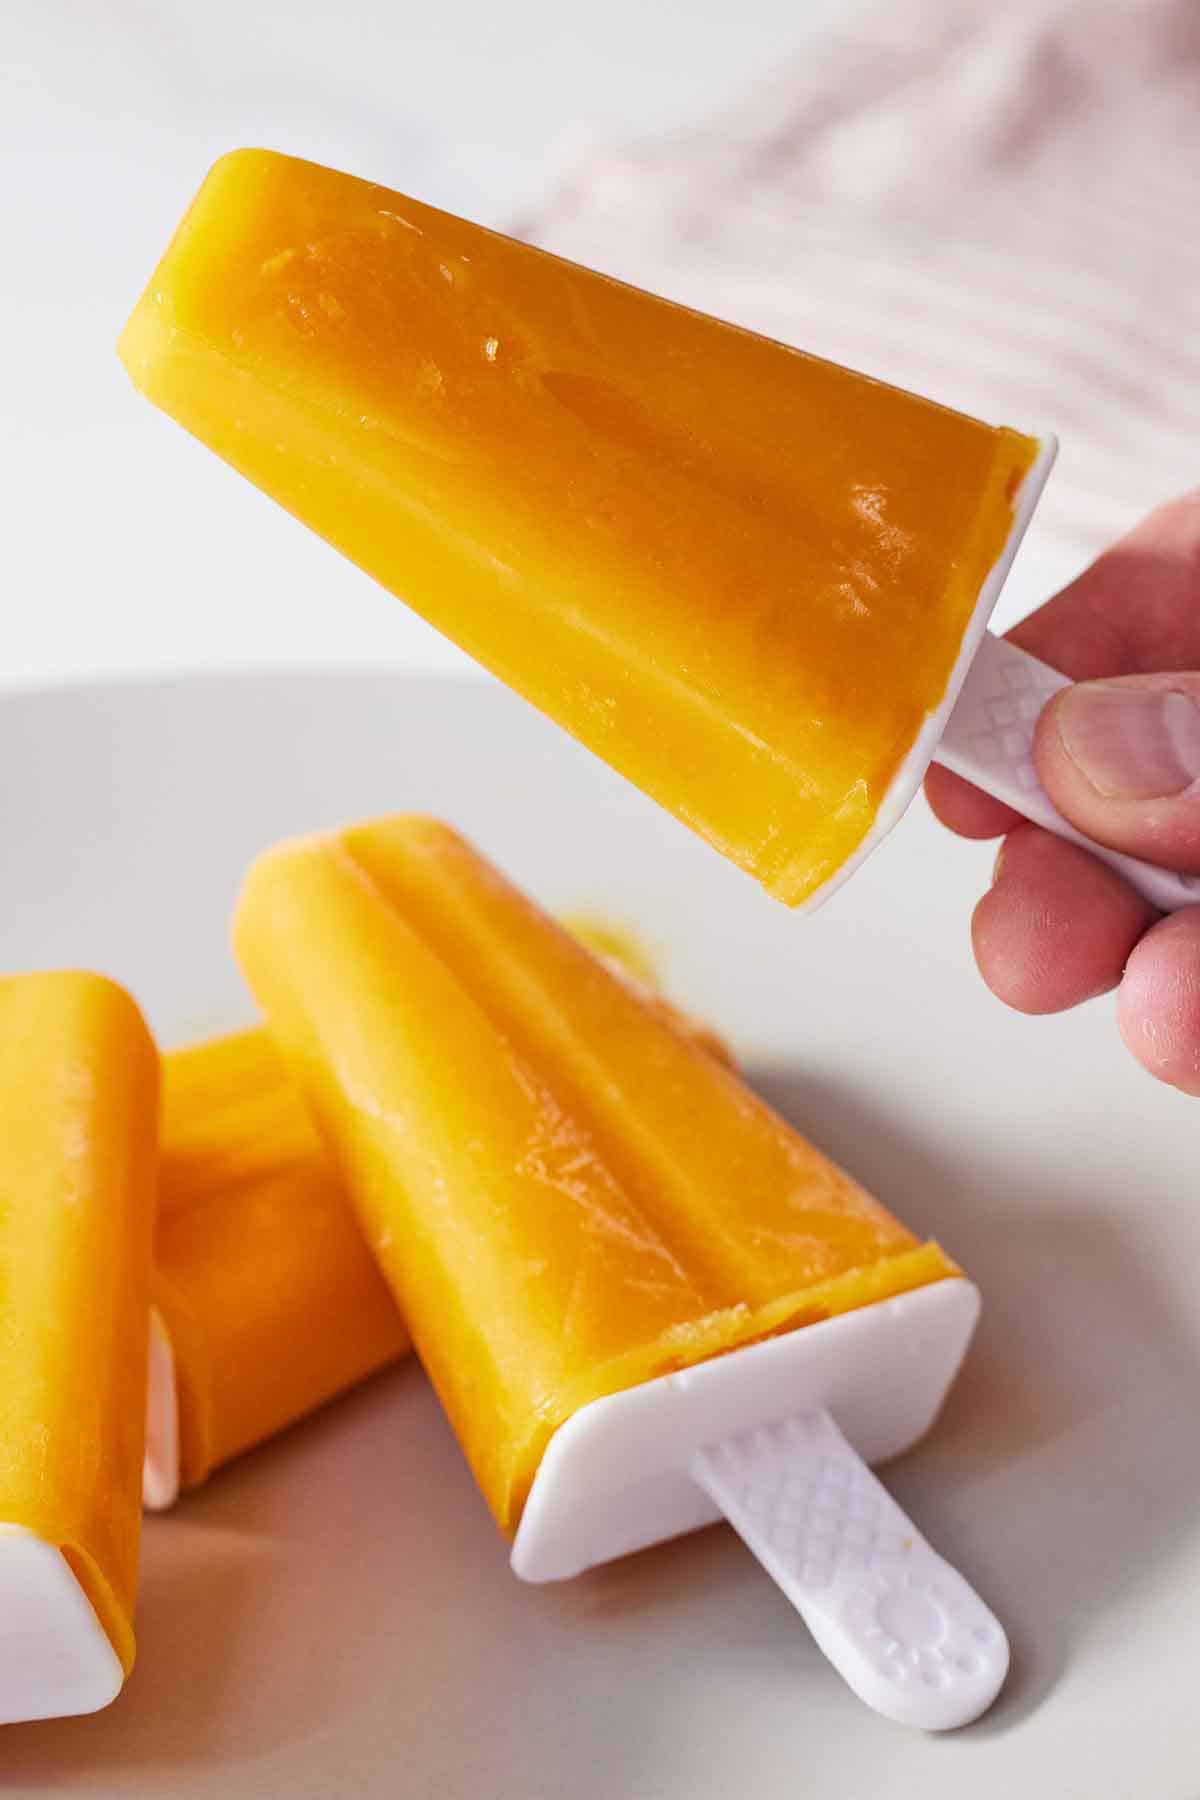 A mango popsicle picked up with more popsicles underneath.